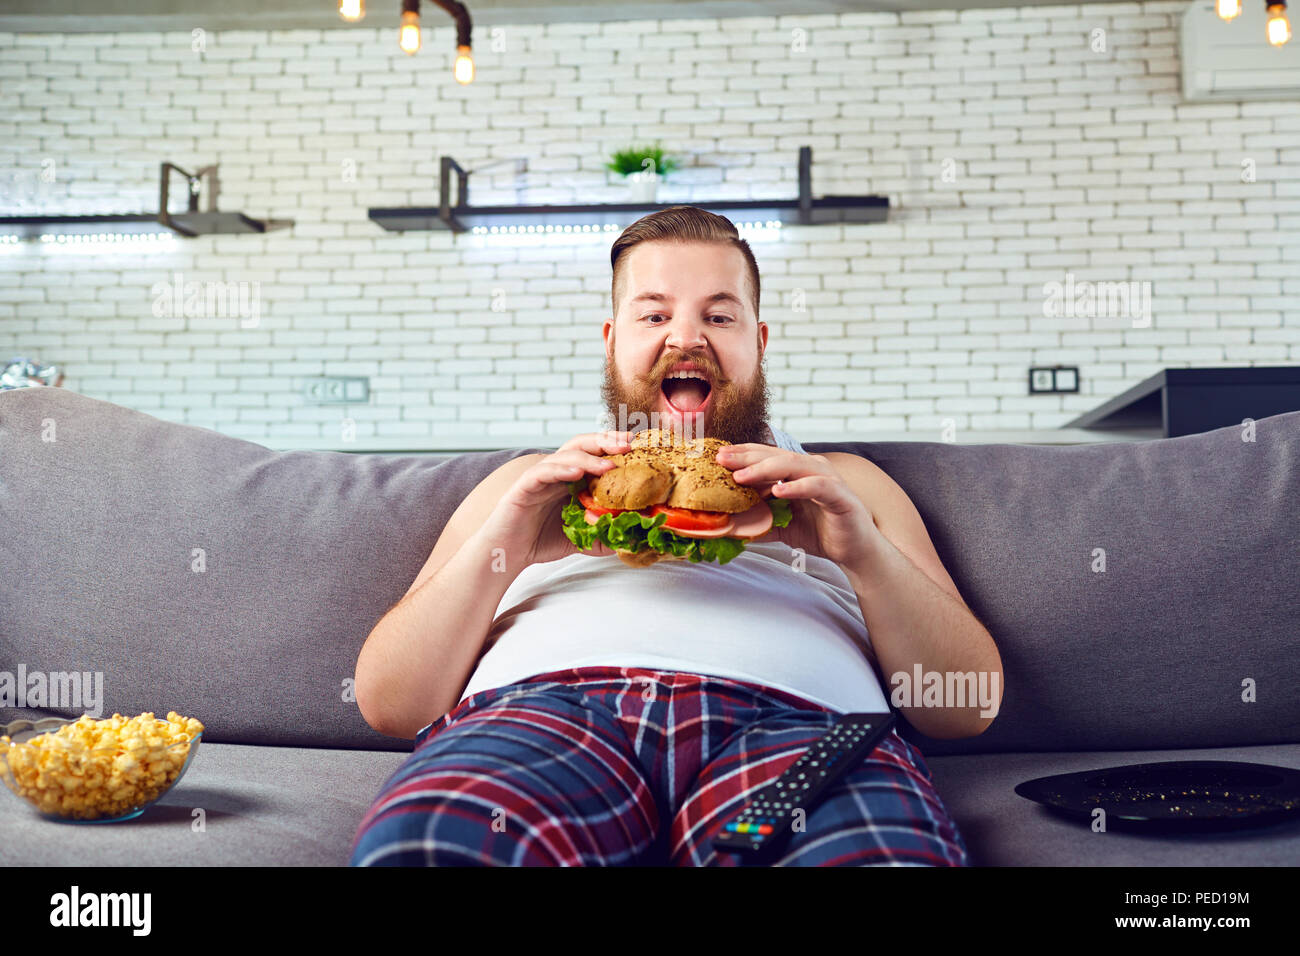 Fat funny man in pajamas eating a burger on the sofa at home. Stock Photo